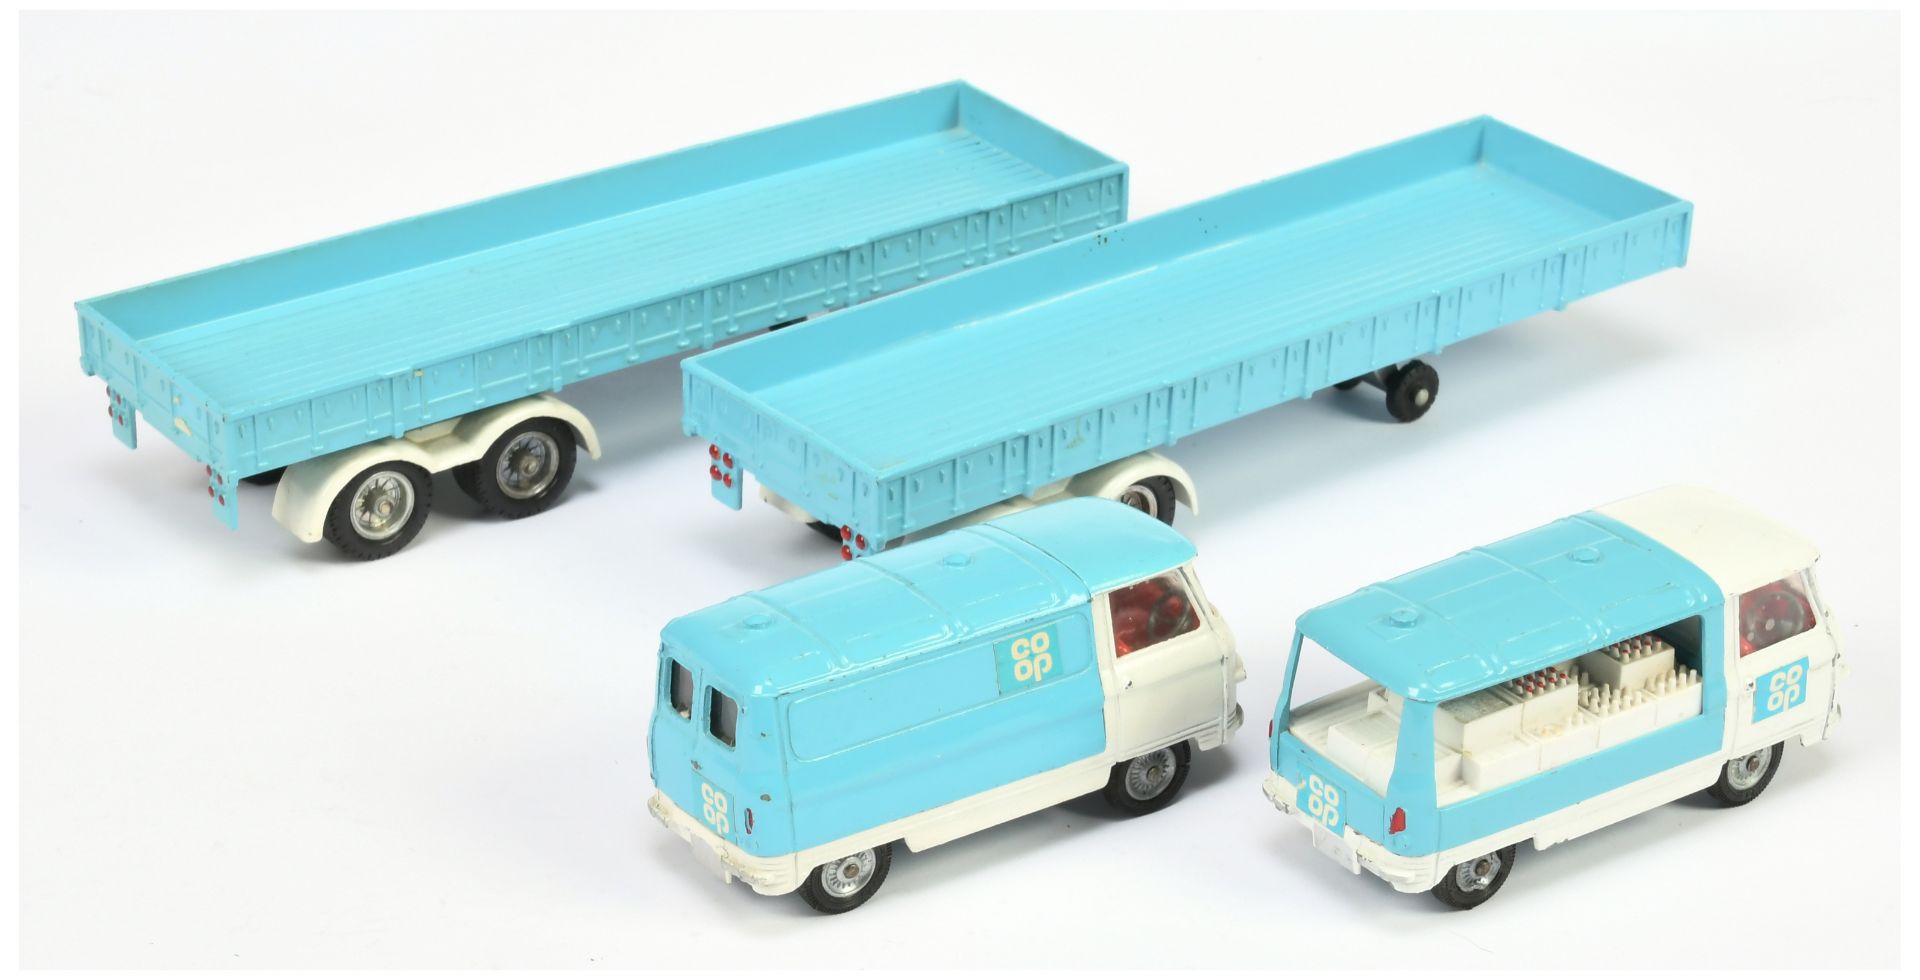 Corgi Toys "CO OP" Group To Include (1) Commer Delivery Truck - White and blue with red interior ... - Image 2 of 2